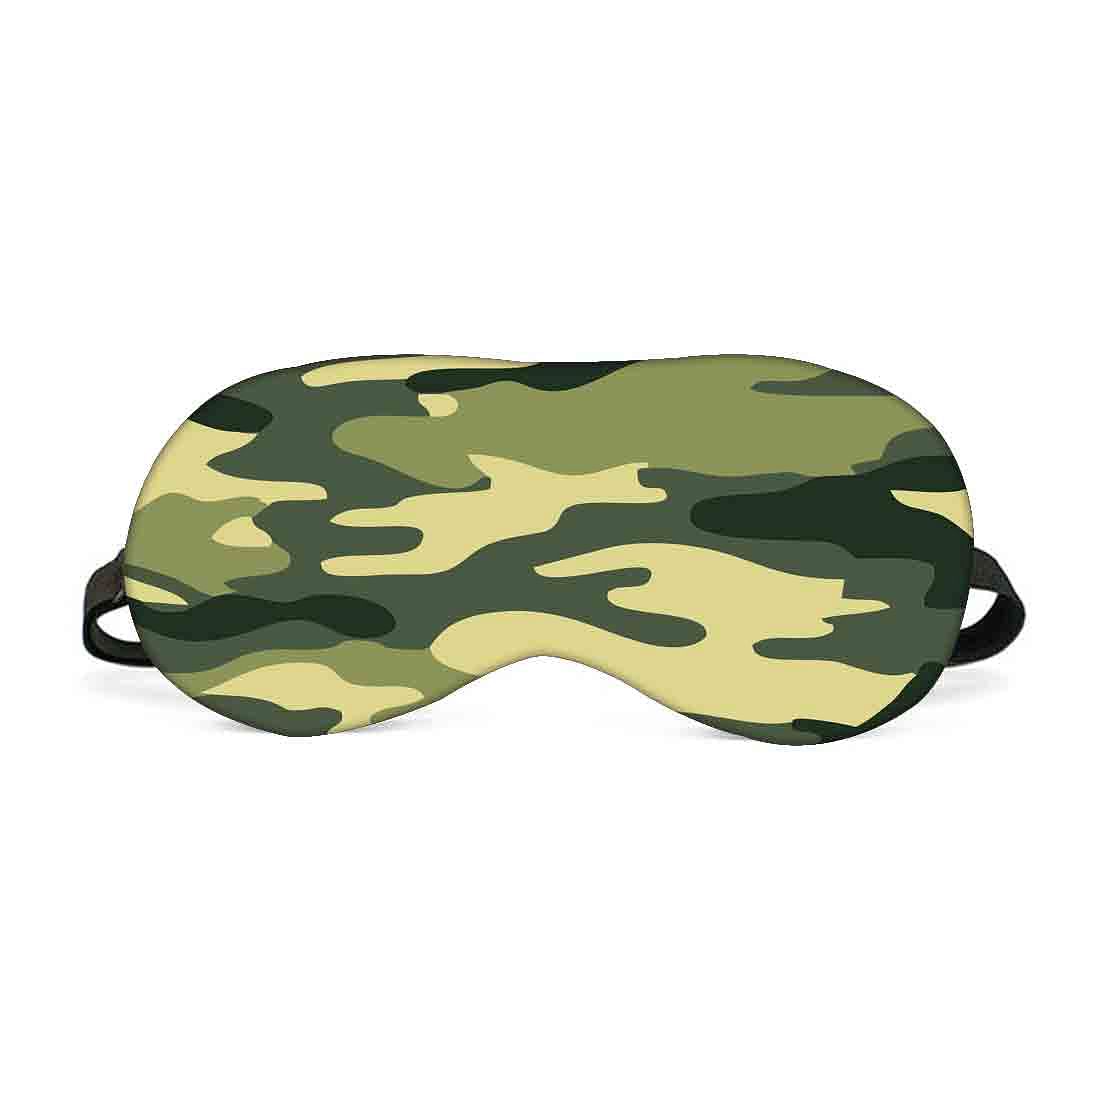 Designer Travel Eye Mask for Sleeping - Army Camouflage - Made in India Nutcase